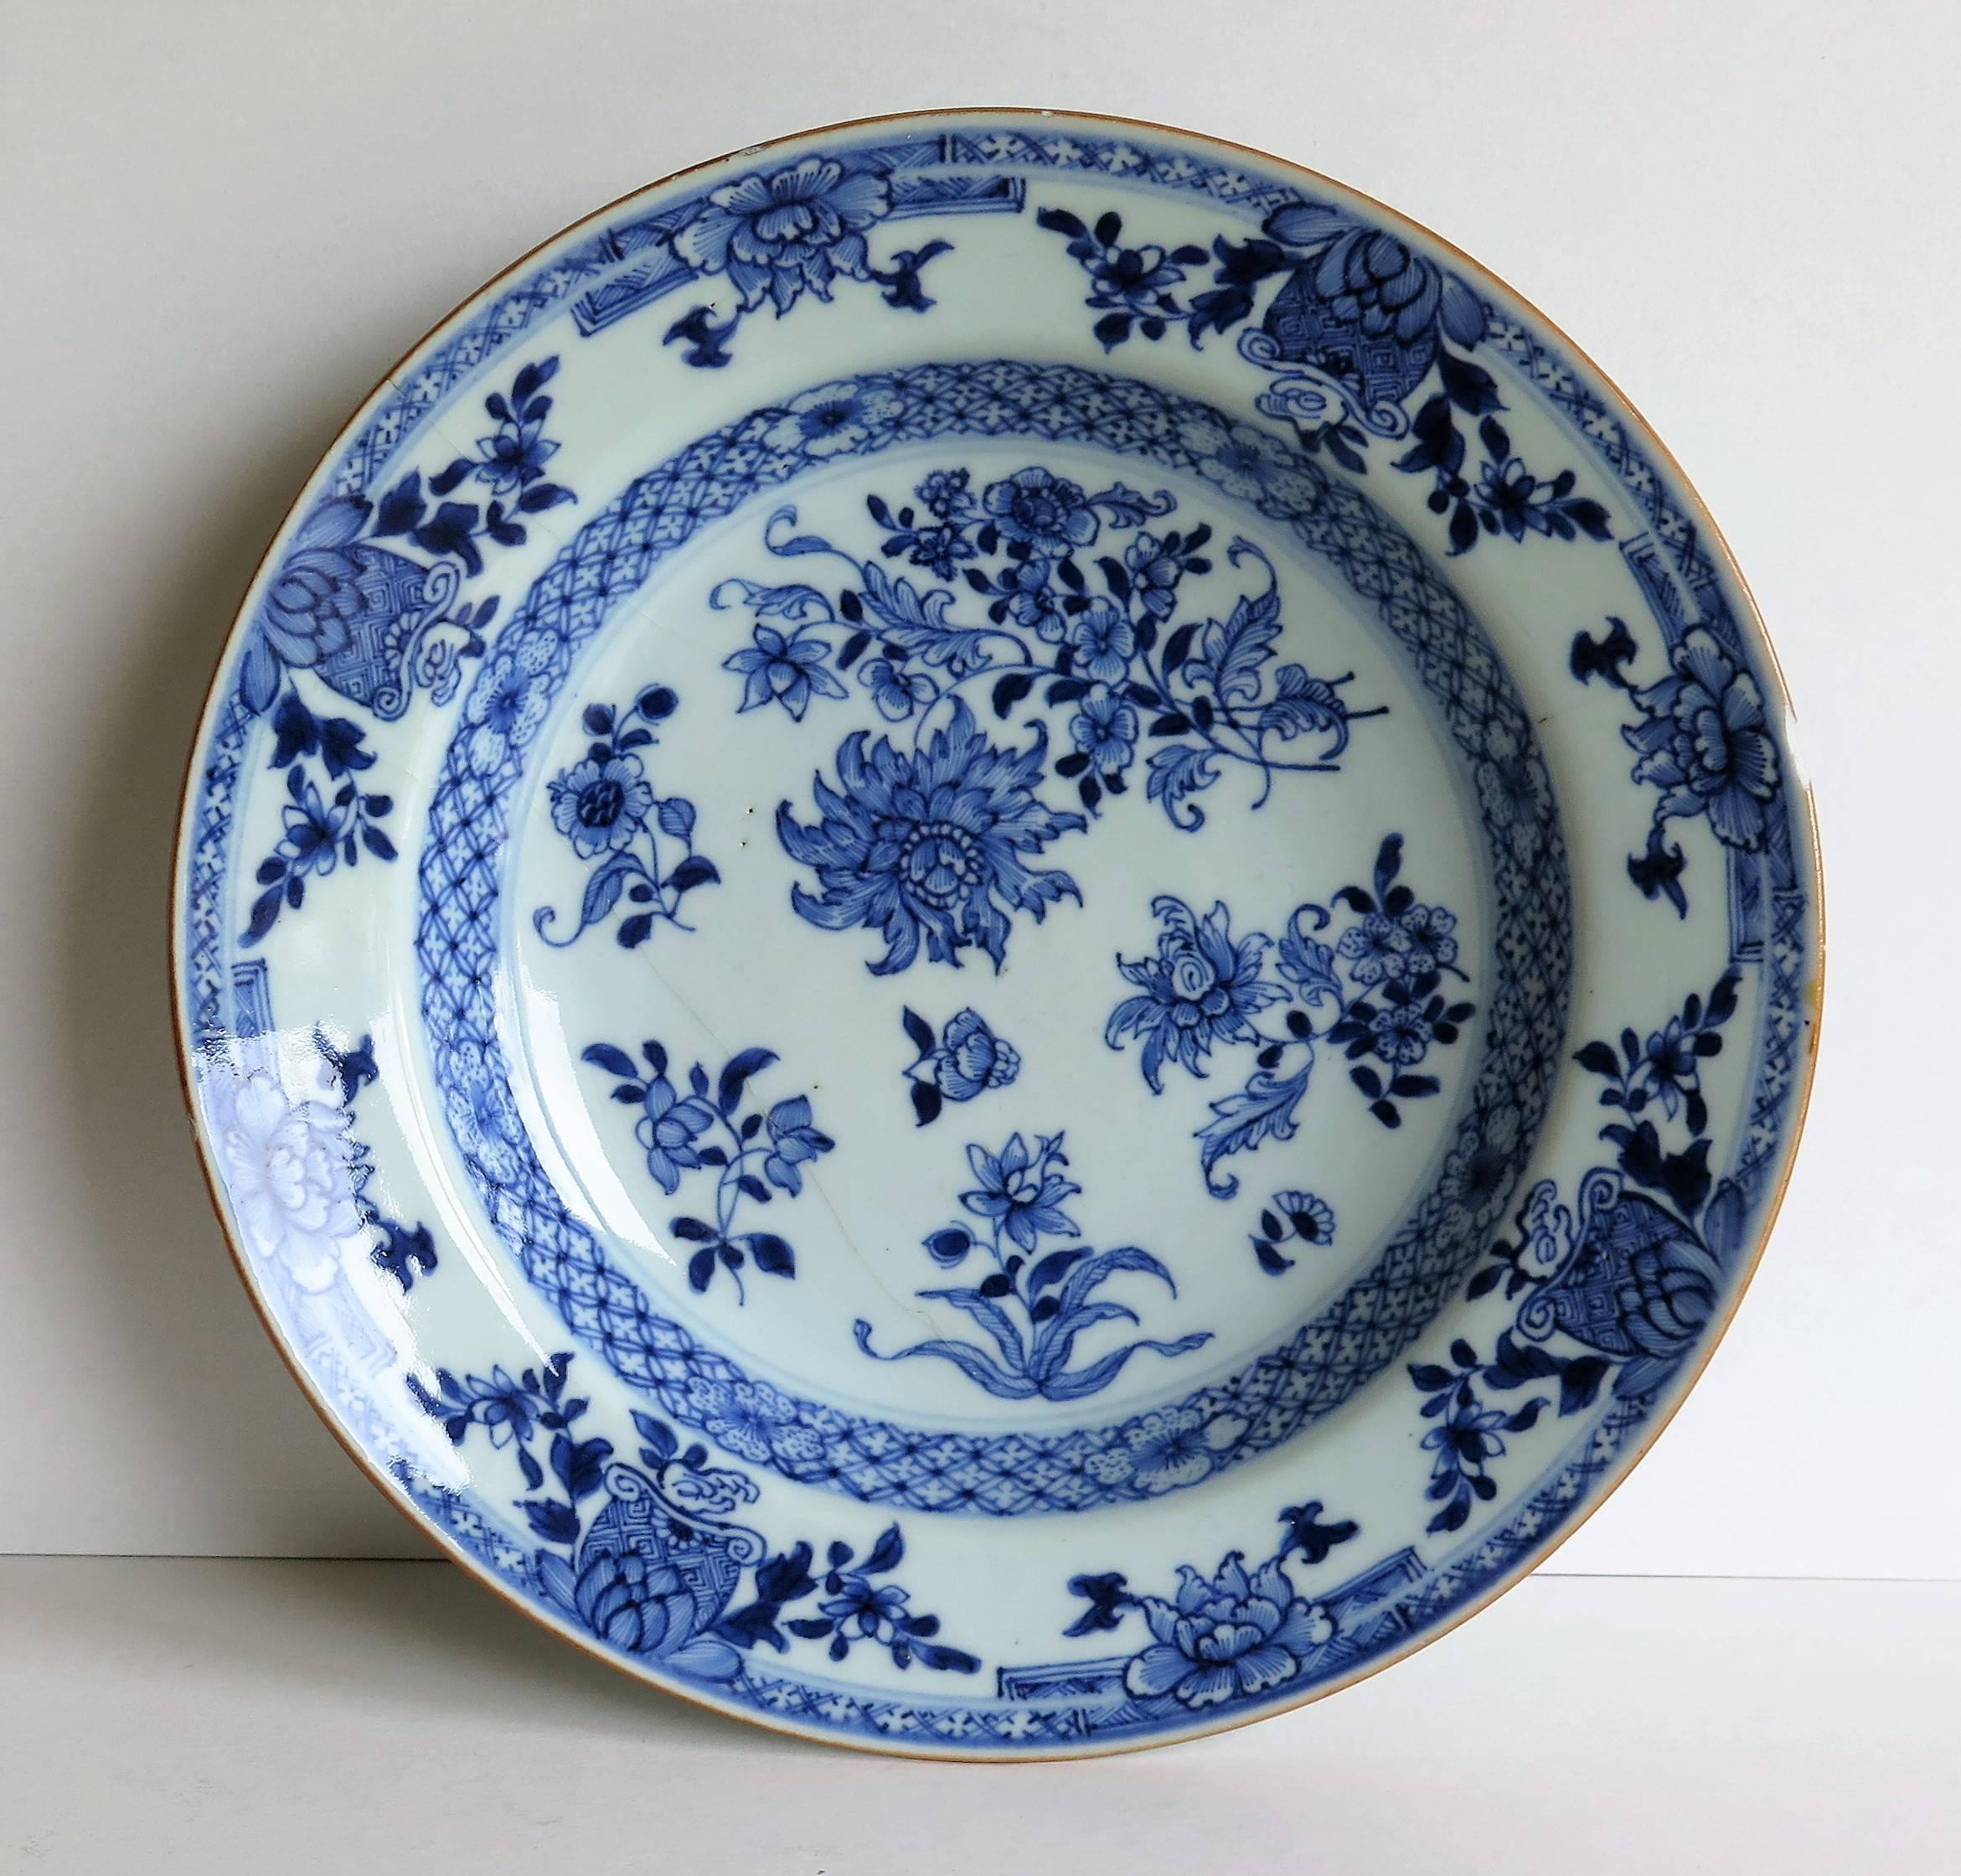 This is a Chinese, Qing dynasty, porcelain, blue and white plate or bowl, from the 18th century, circa 1770.

The plate is circular in shape, decorated in varying shades of cobalt blue, with a glassy glaze of a very light blue shade. The base is